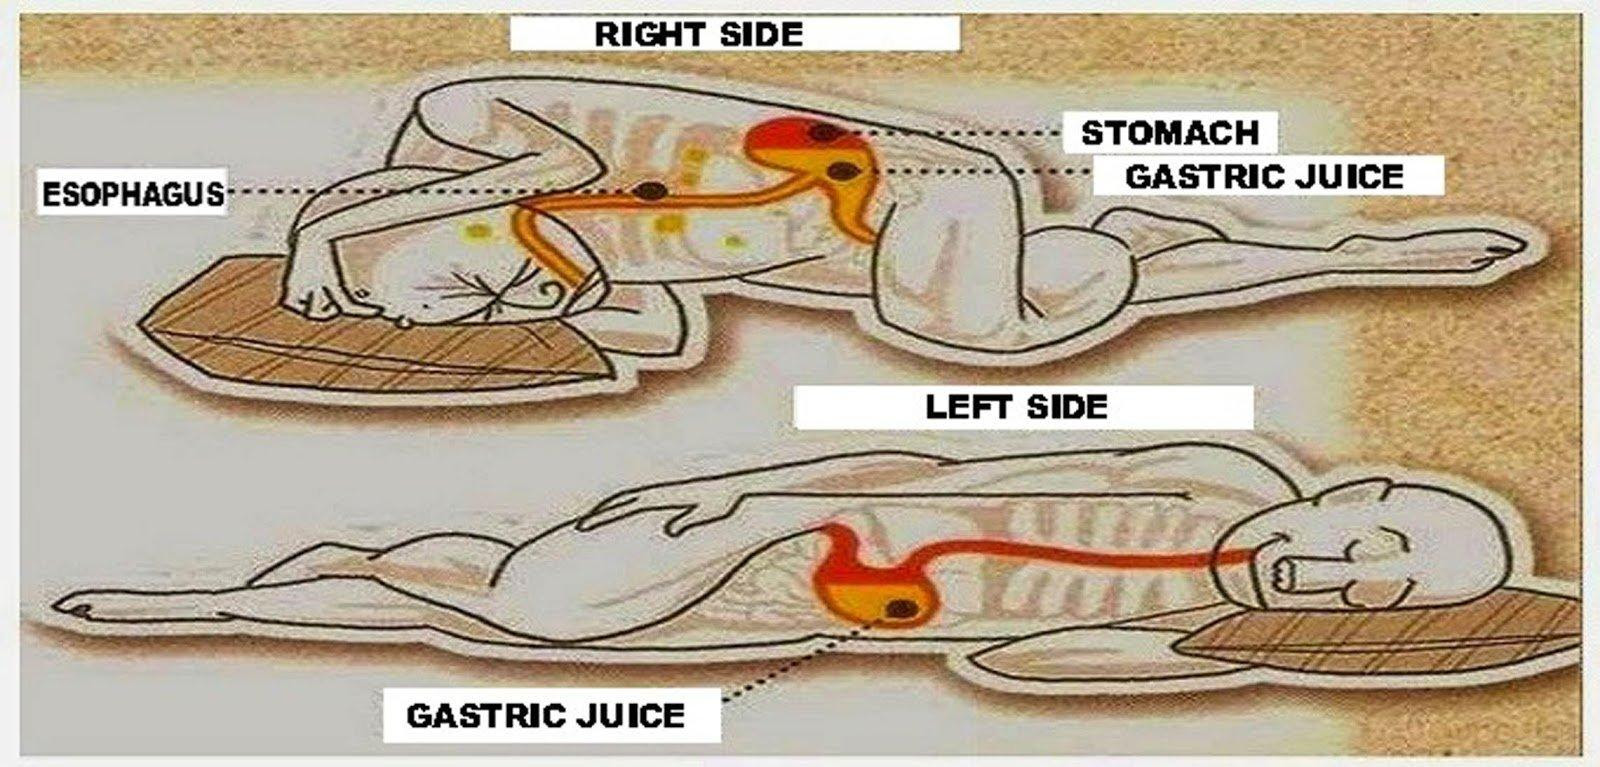 Why It's Recommended to Sleep On Your Left Side